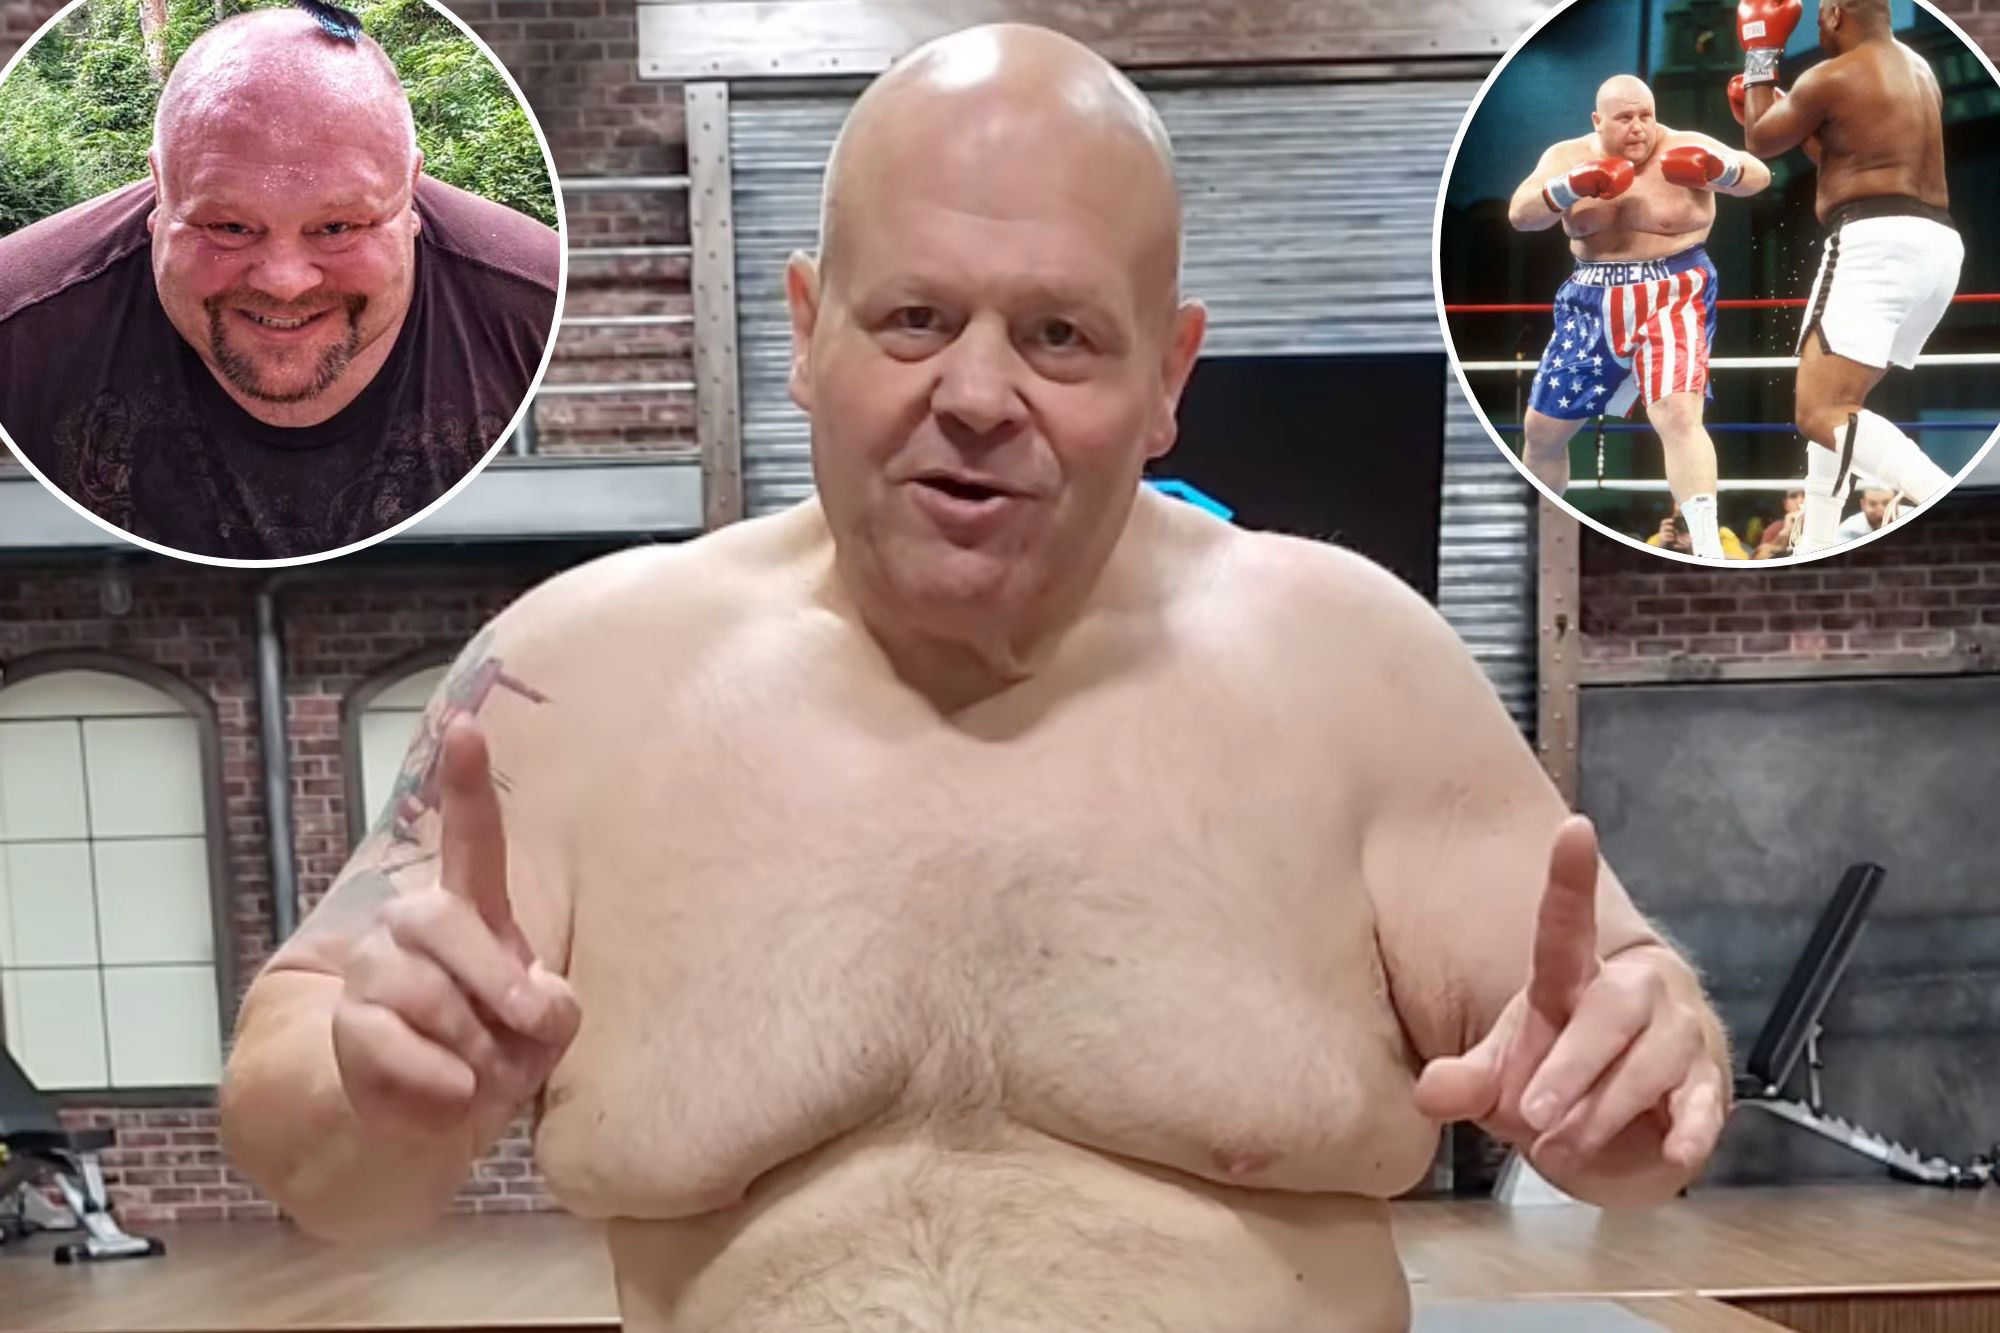 Exboxer Butterbean Esch loses more than 200 pounds in dramatic